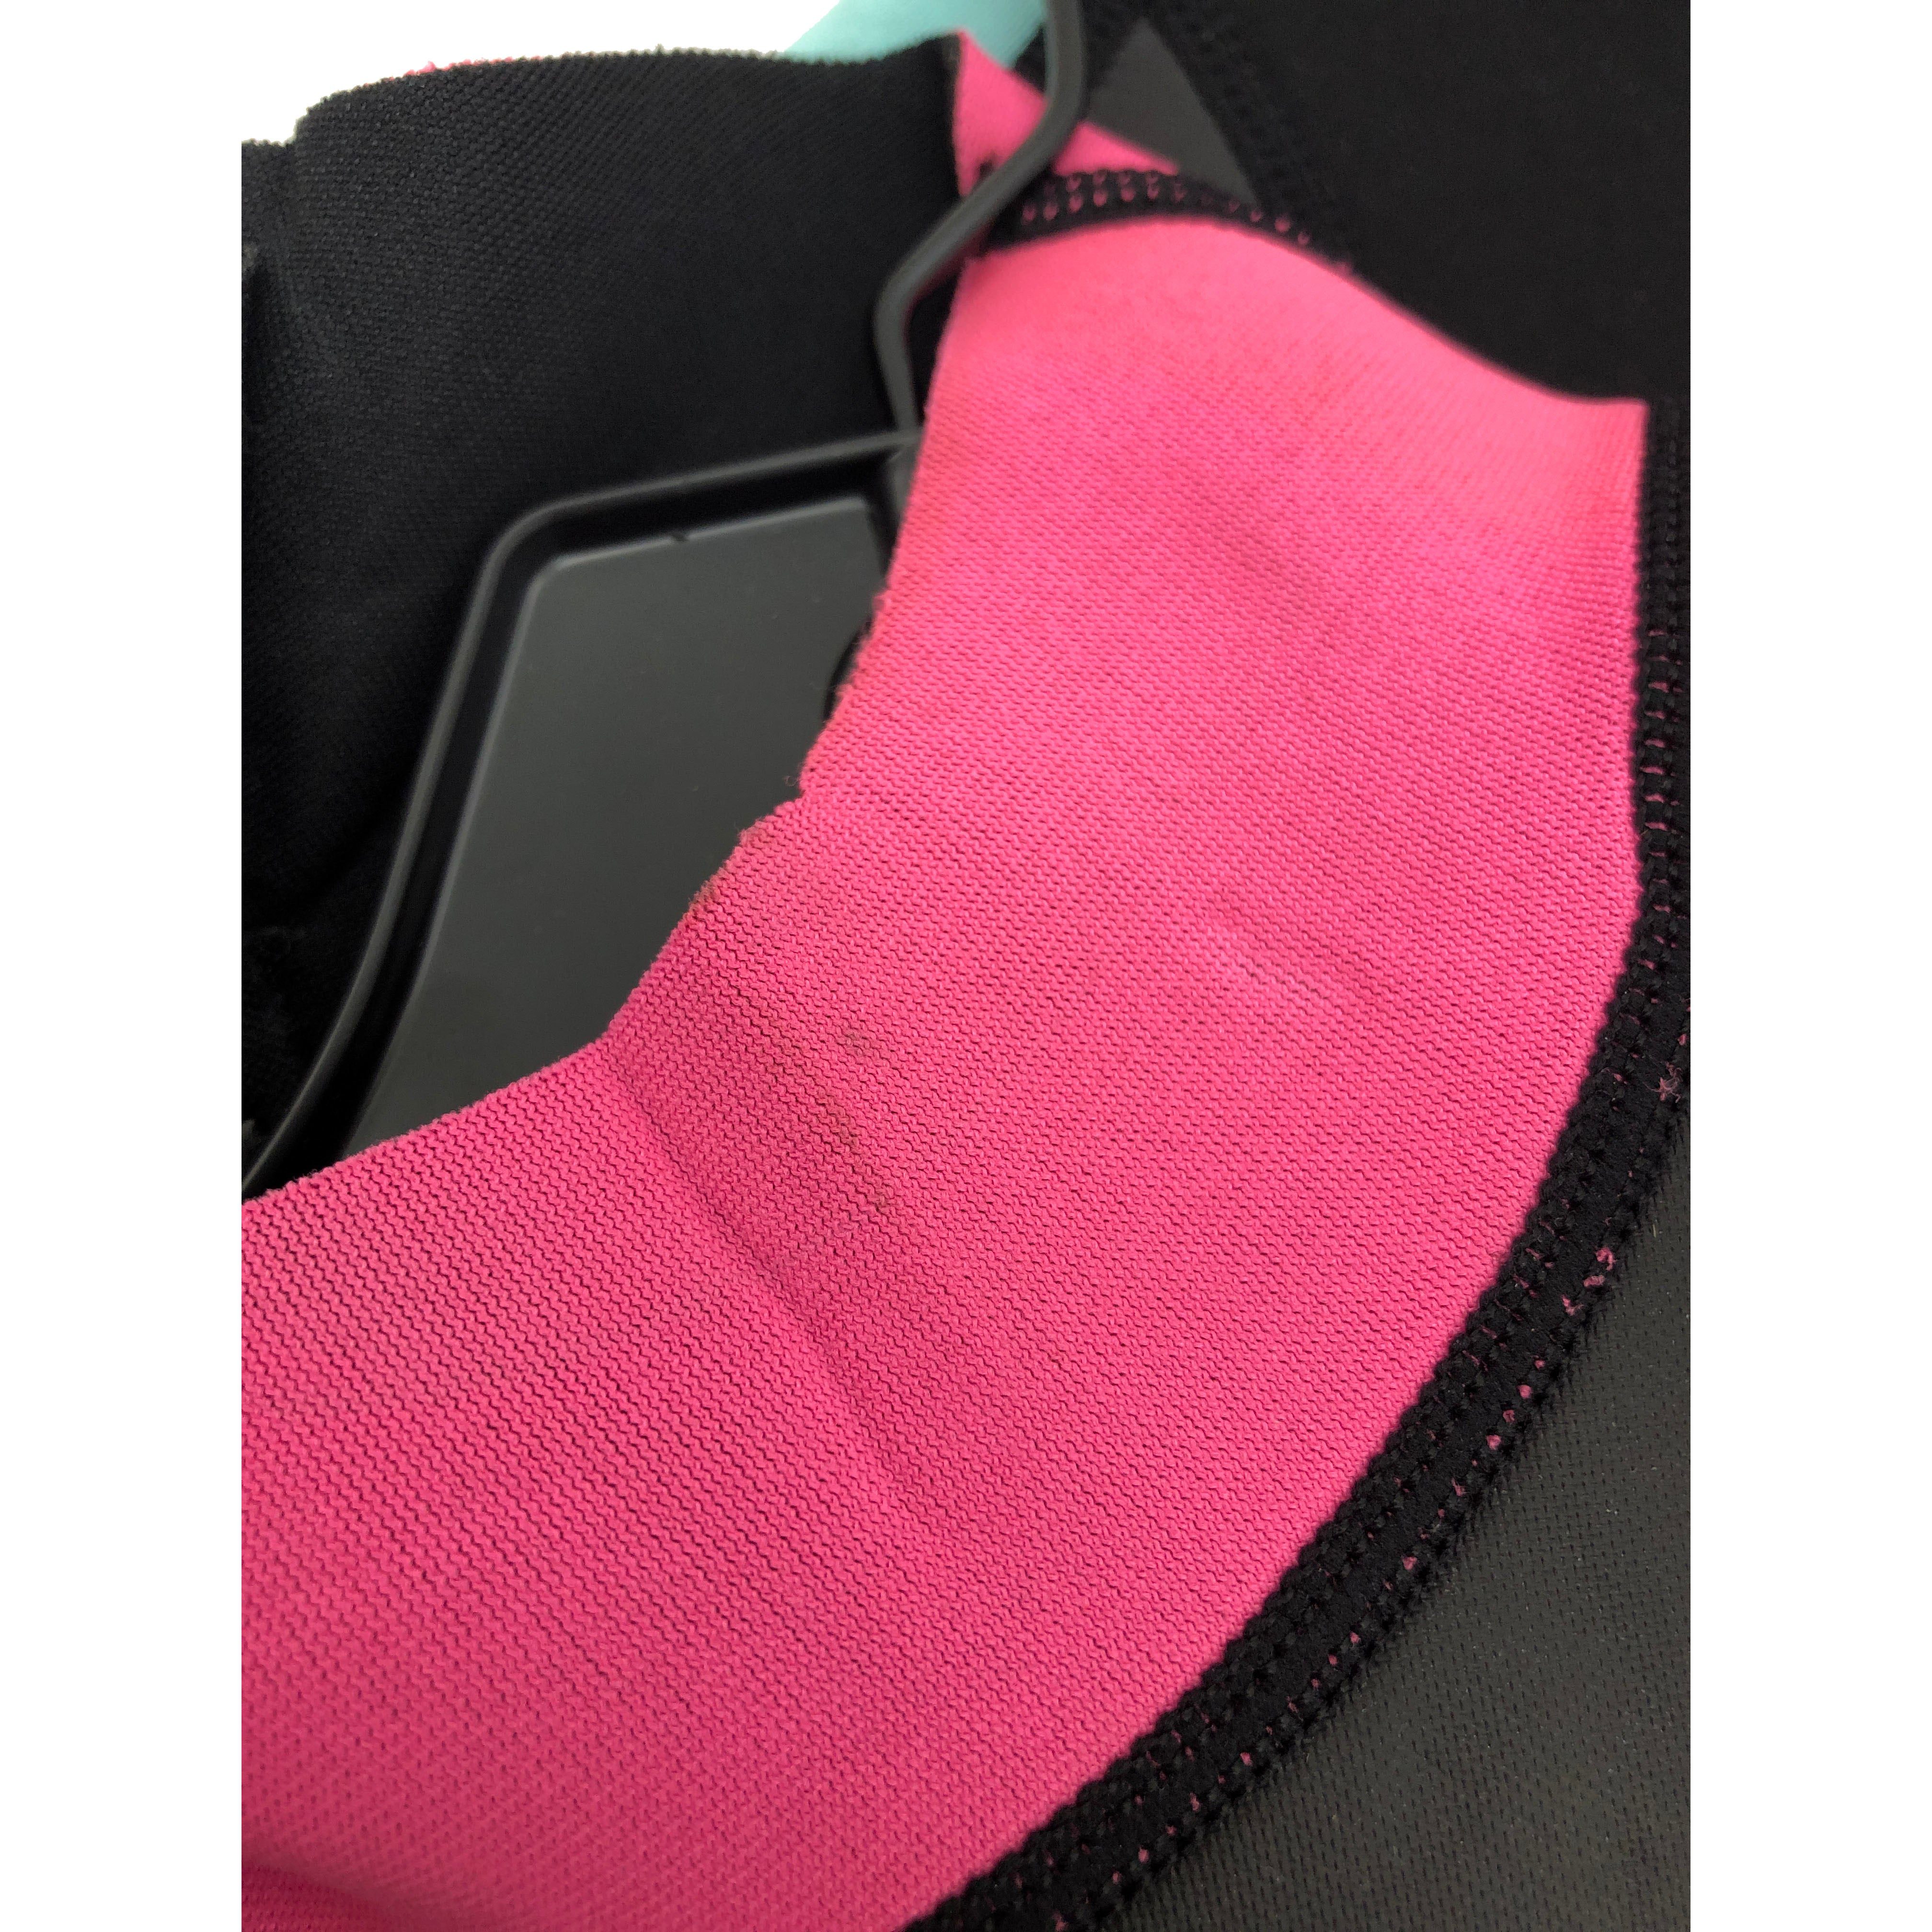 Body Glove Women's Wetsuit / Springsuit / Size: Small 5/6 / Black/Pink